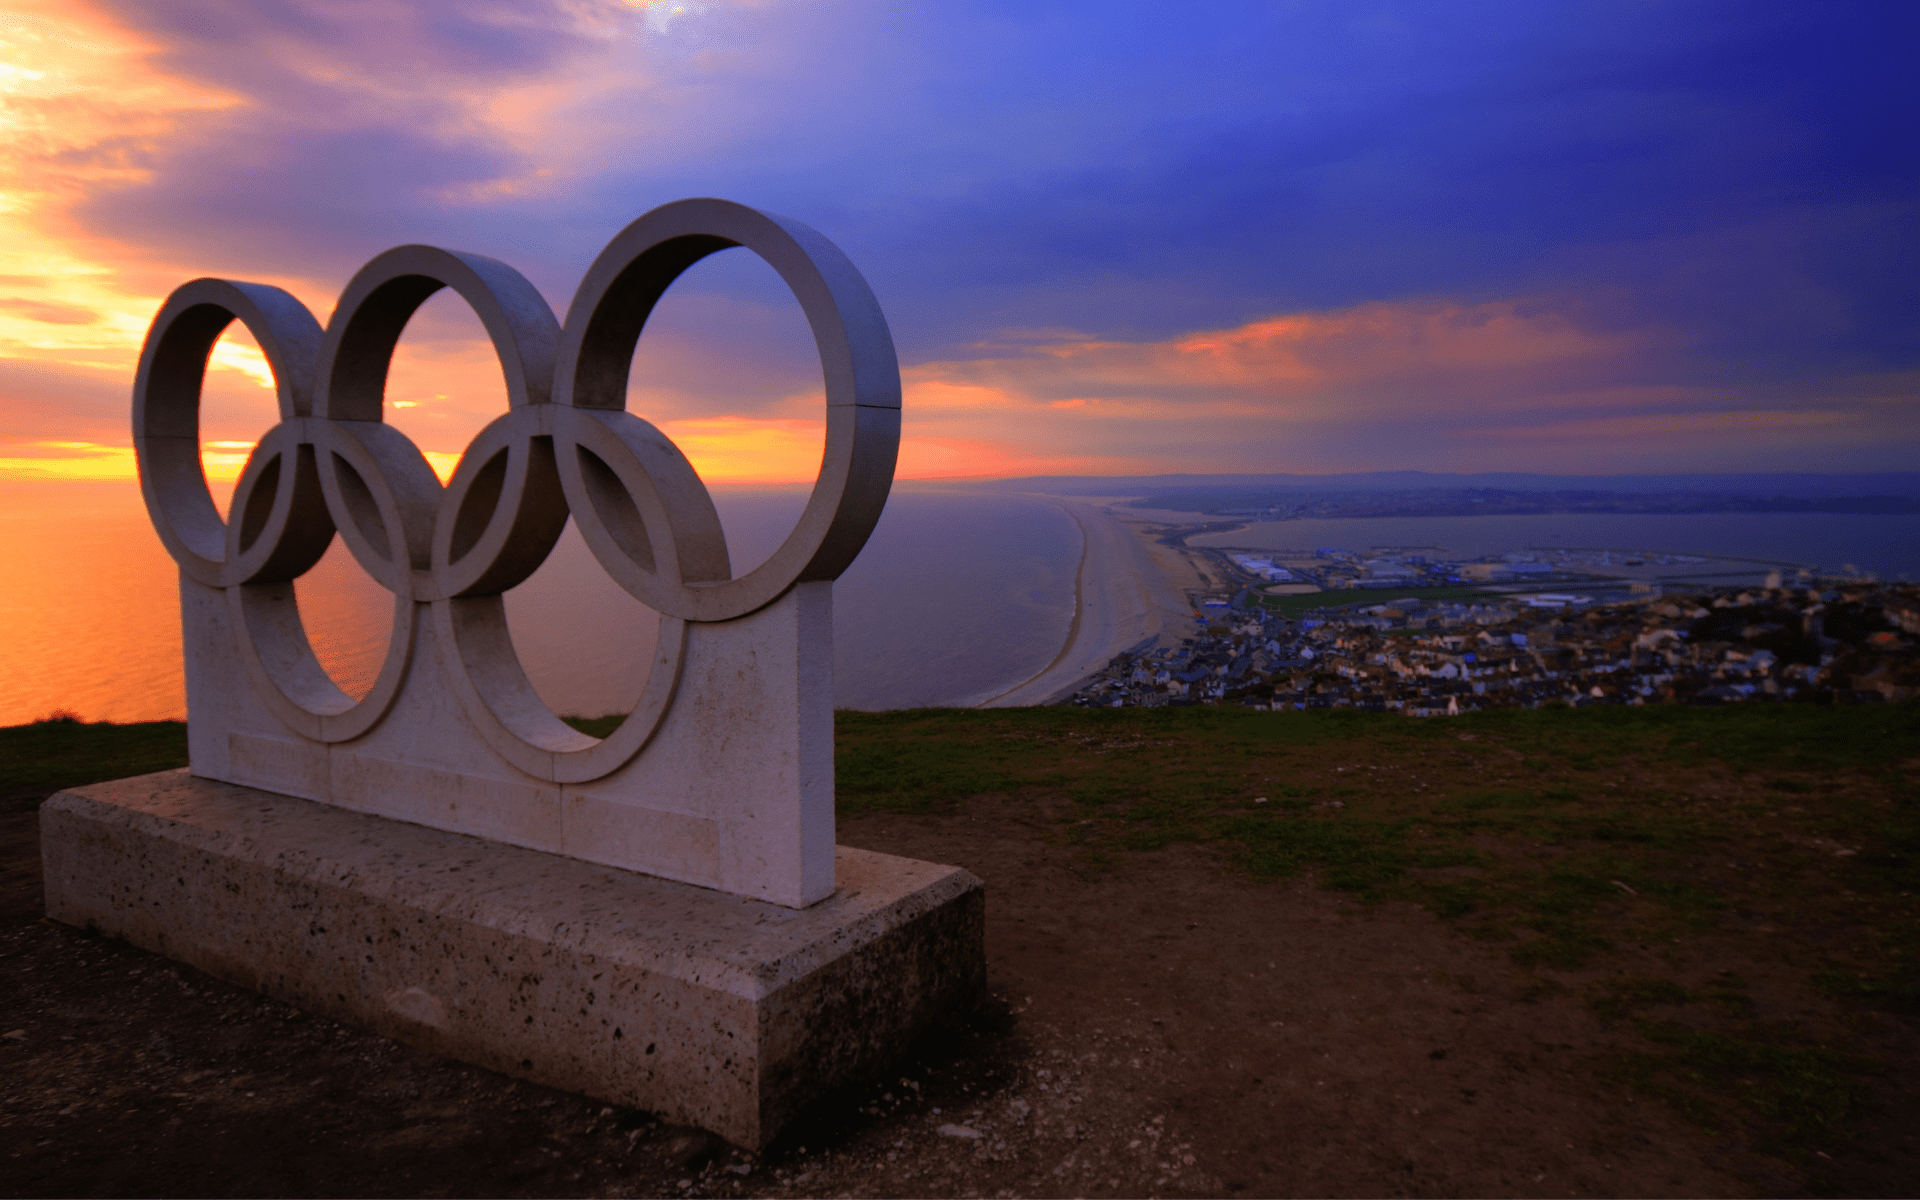 Let’s Have a Little Olympic Chat (Summer 2021 Games)